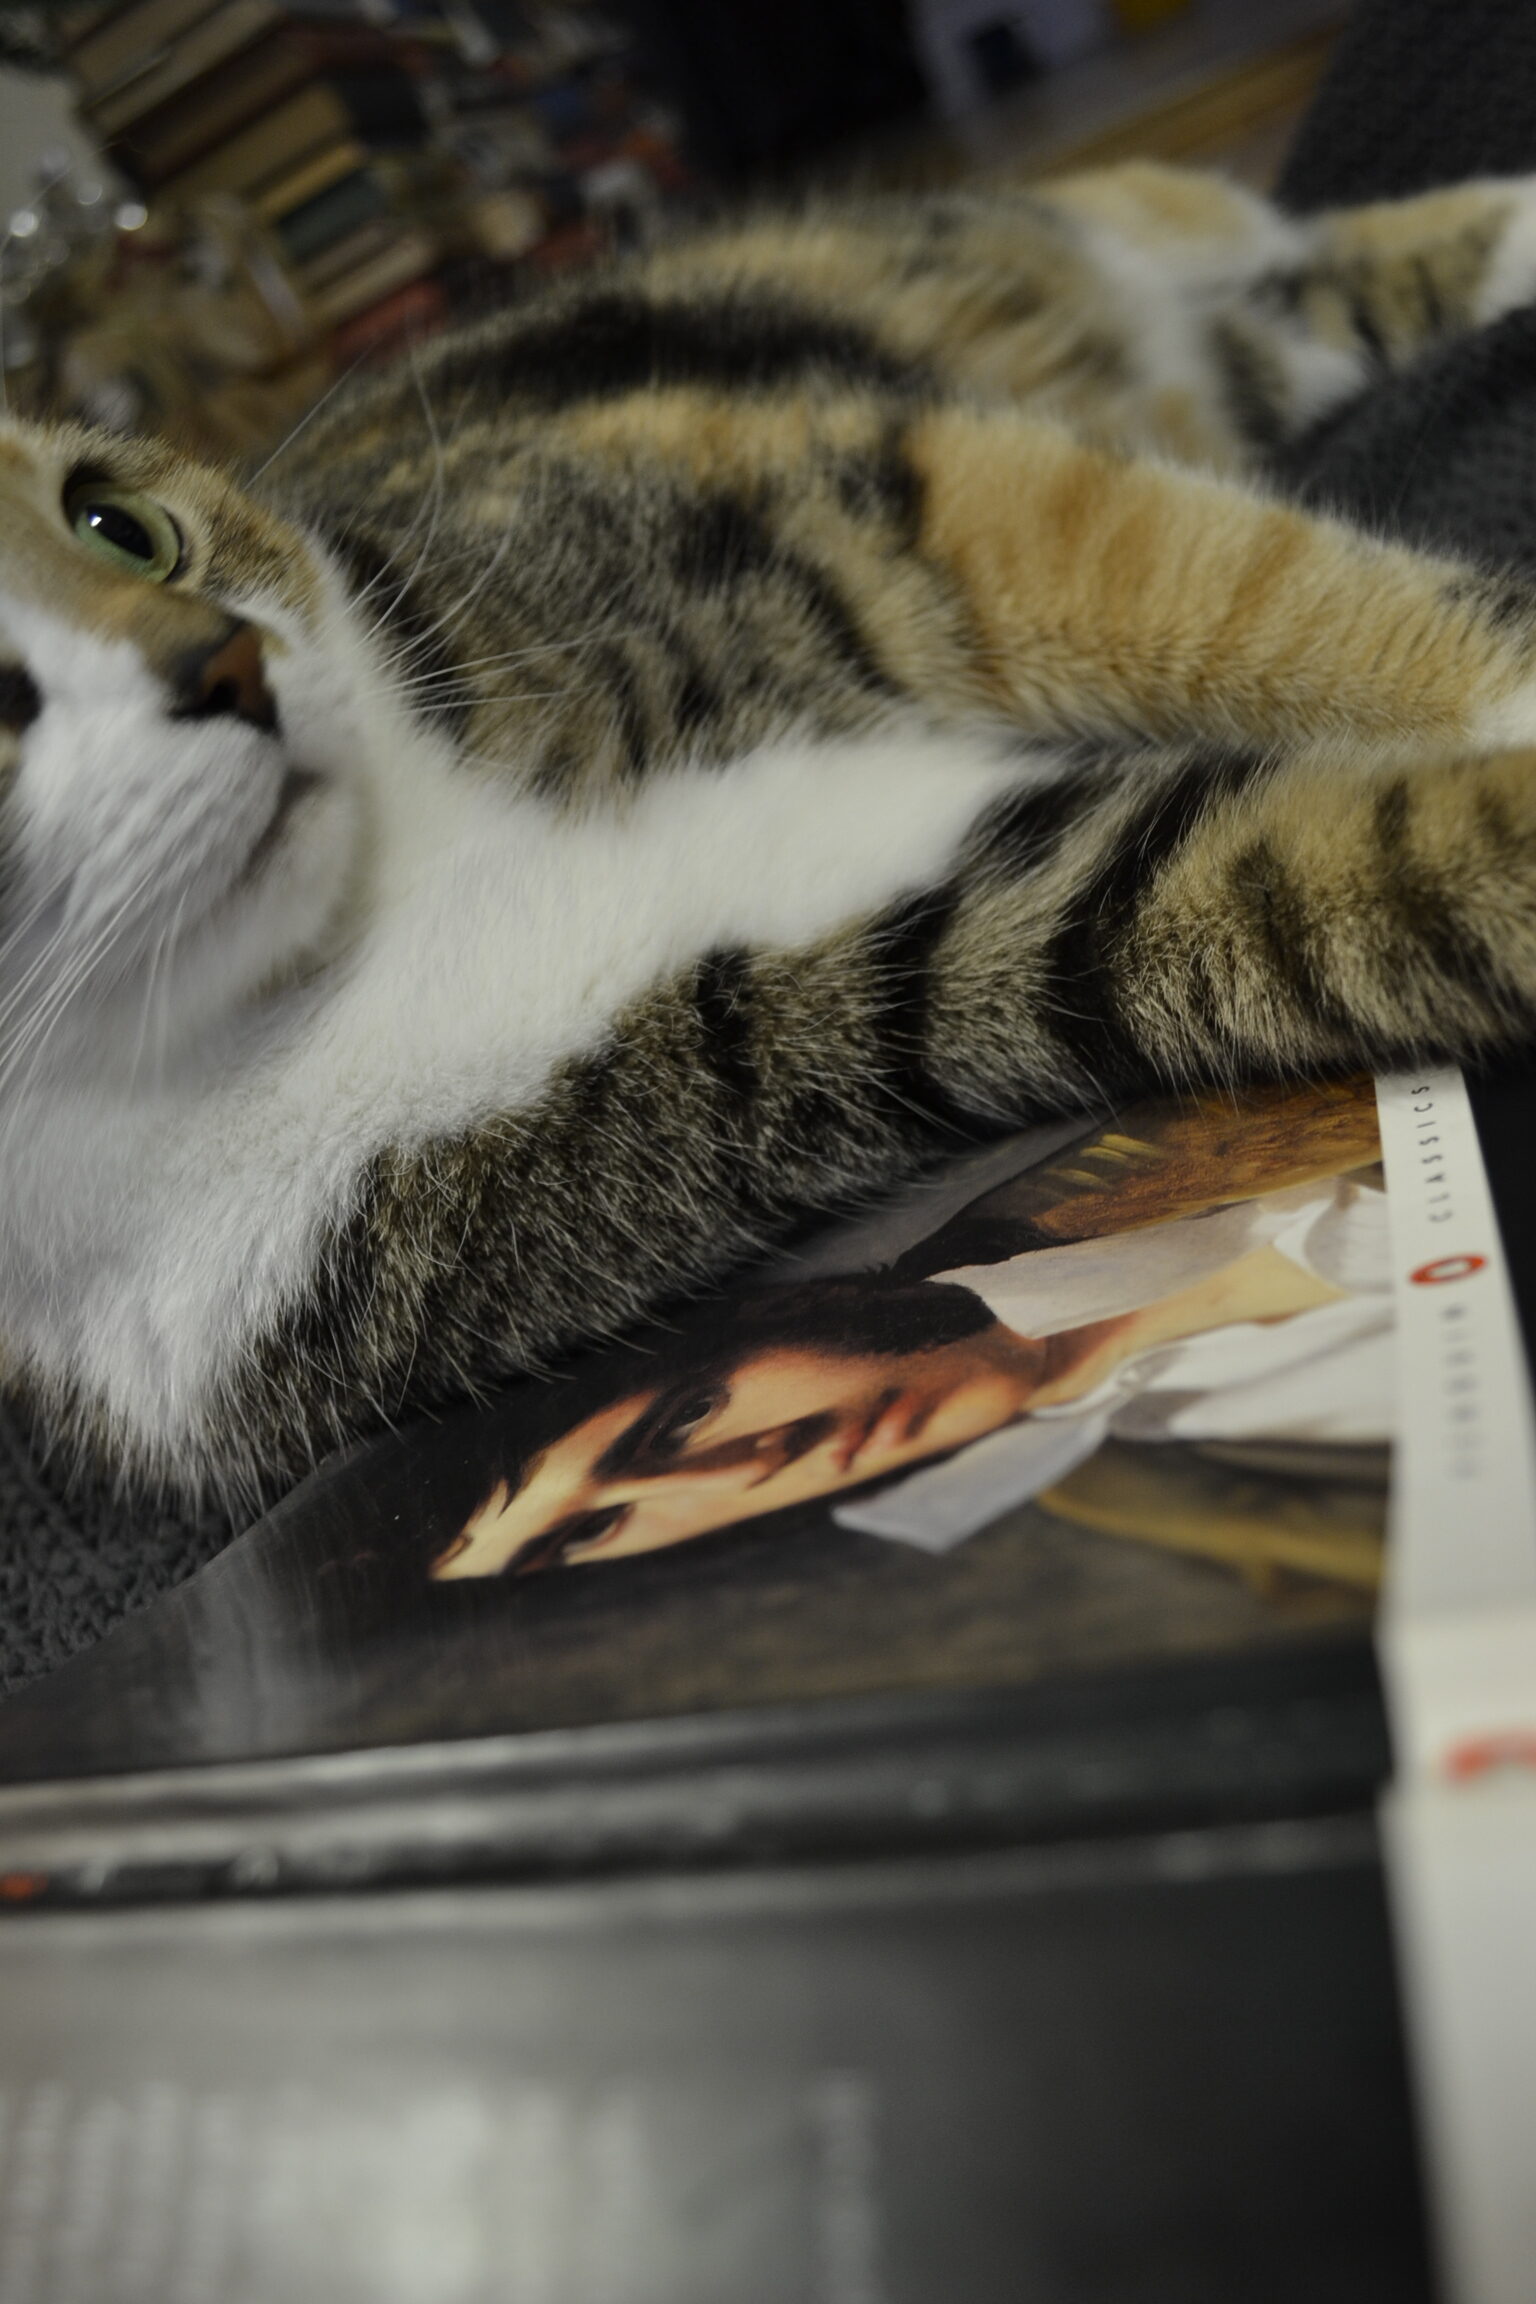 A calico tabby cat lounges beside a copy of Eugene Onegin.